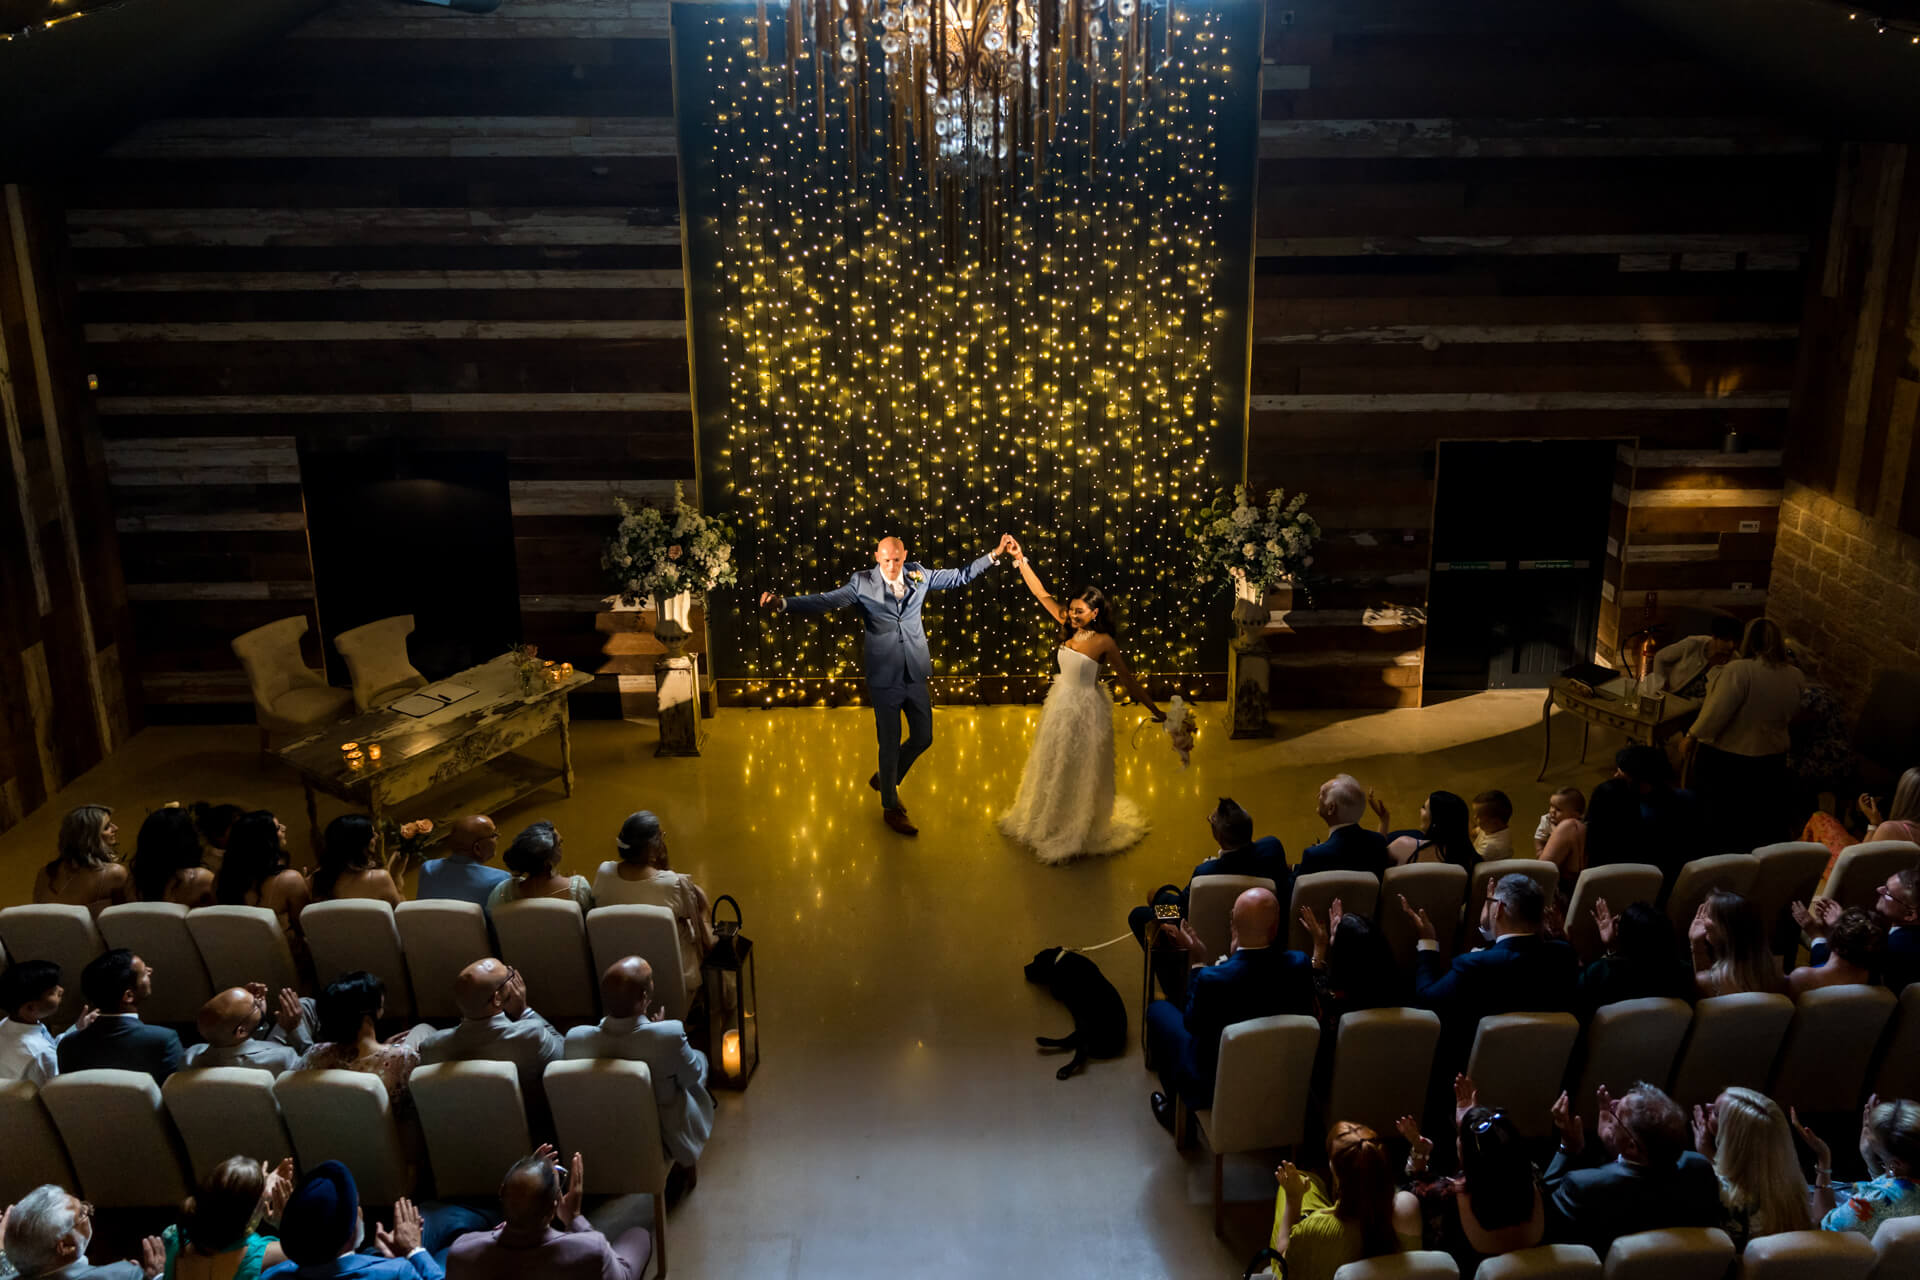 Bride and groom first dance with fairy lights backdrop.